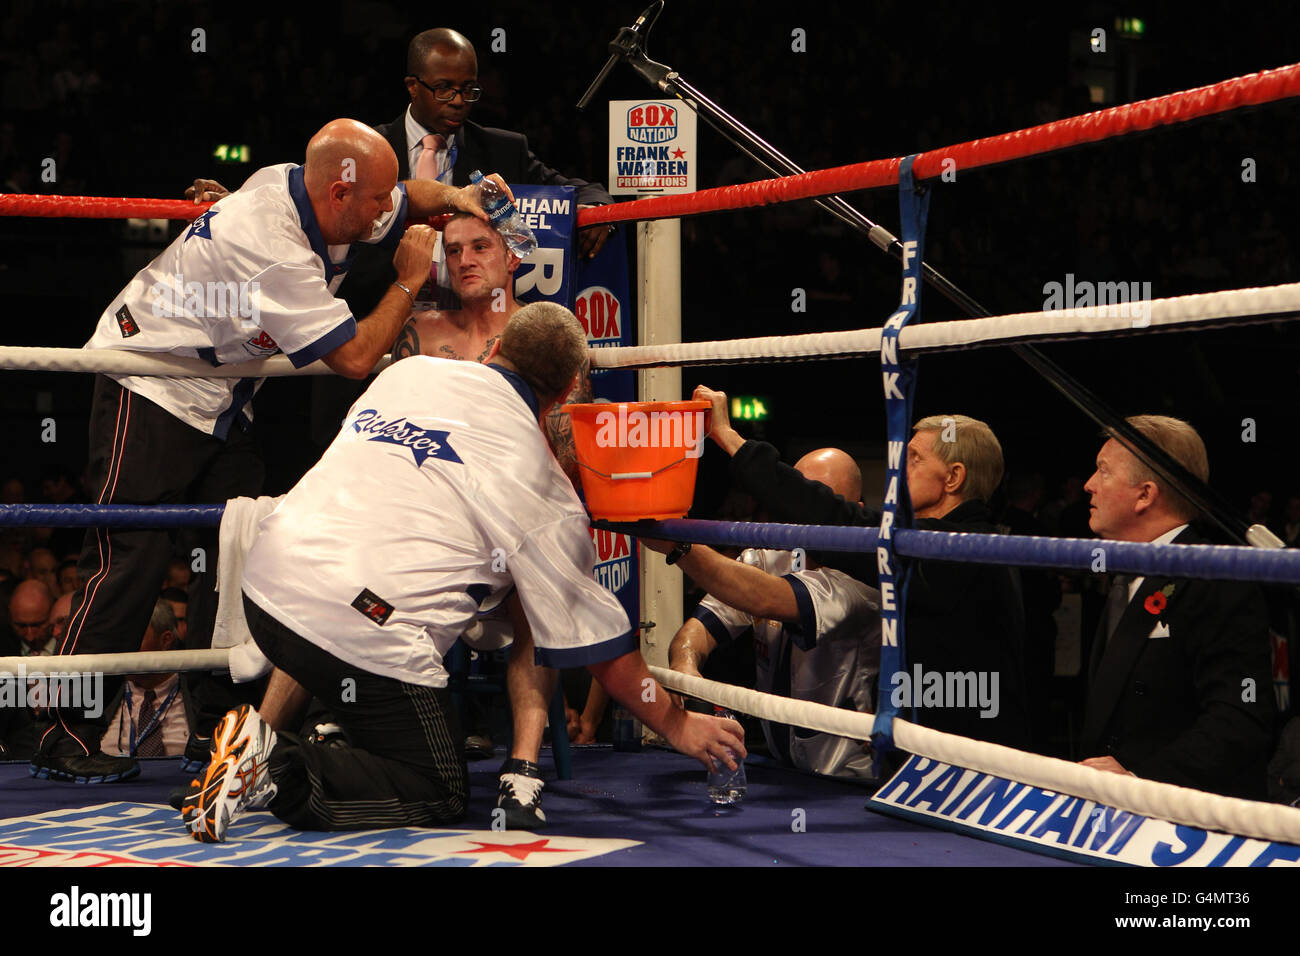 Scotland's Ricky Burns is looked after his corner as promoter Frank Warren shouts advice during his points victory over Australia's Michael Katsidis during the WBO Interim Lightweight Title fight at Wembley Arena, London. Stock Photo